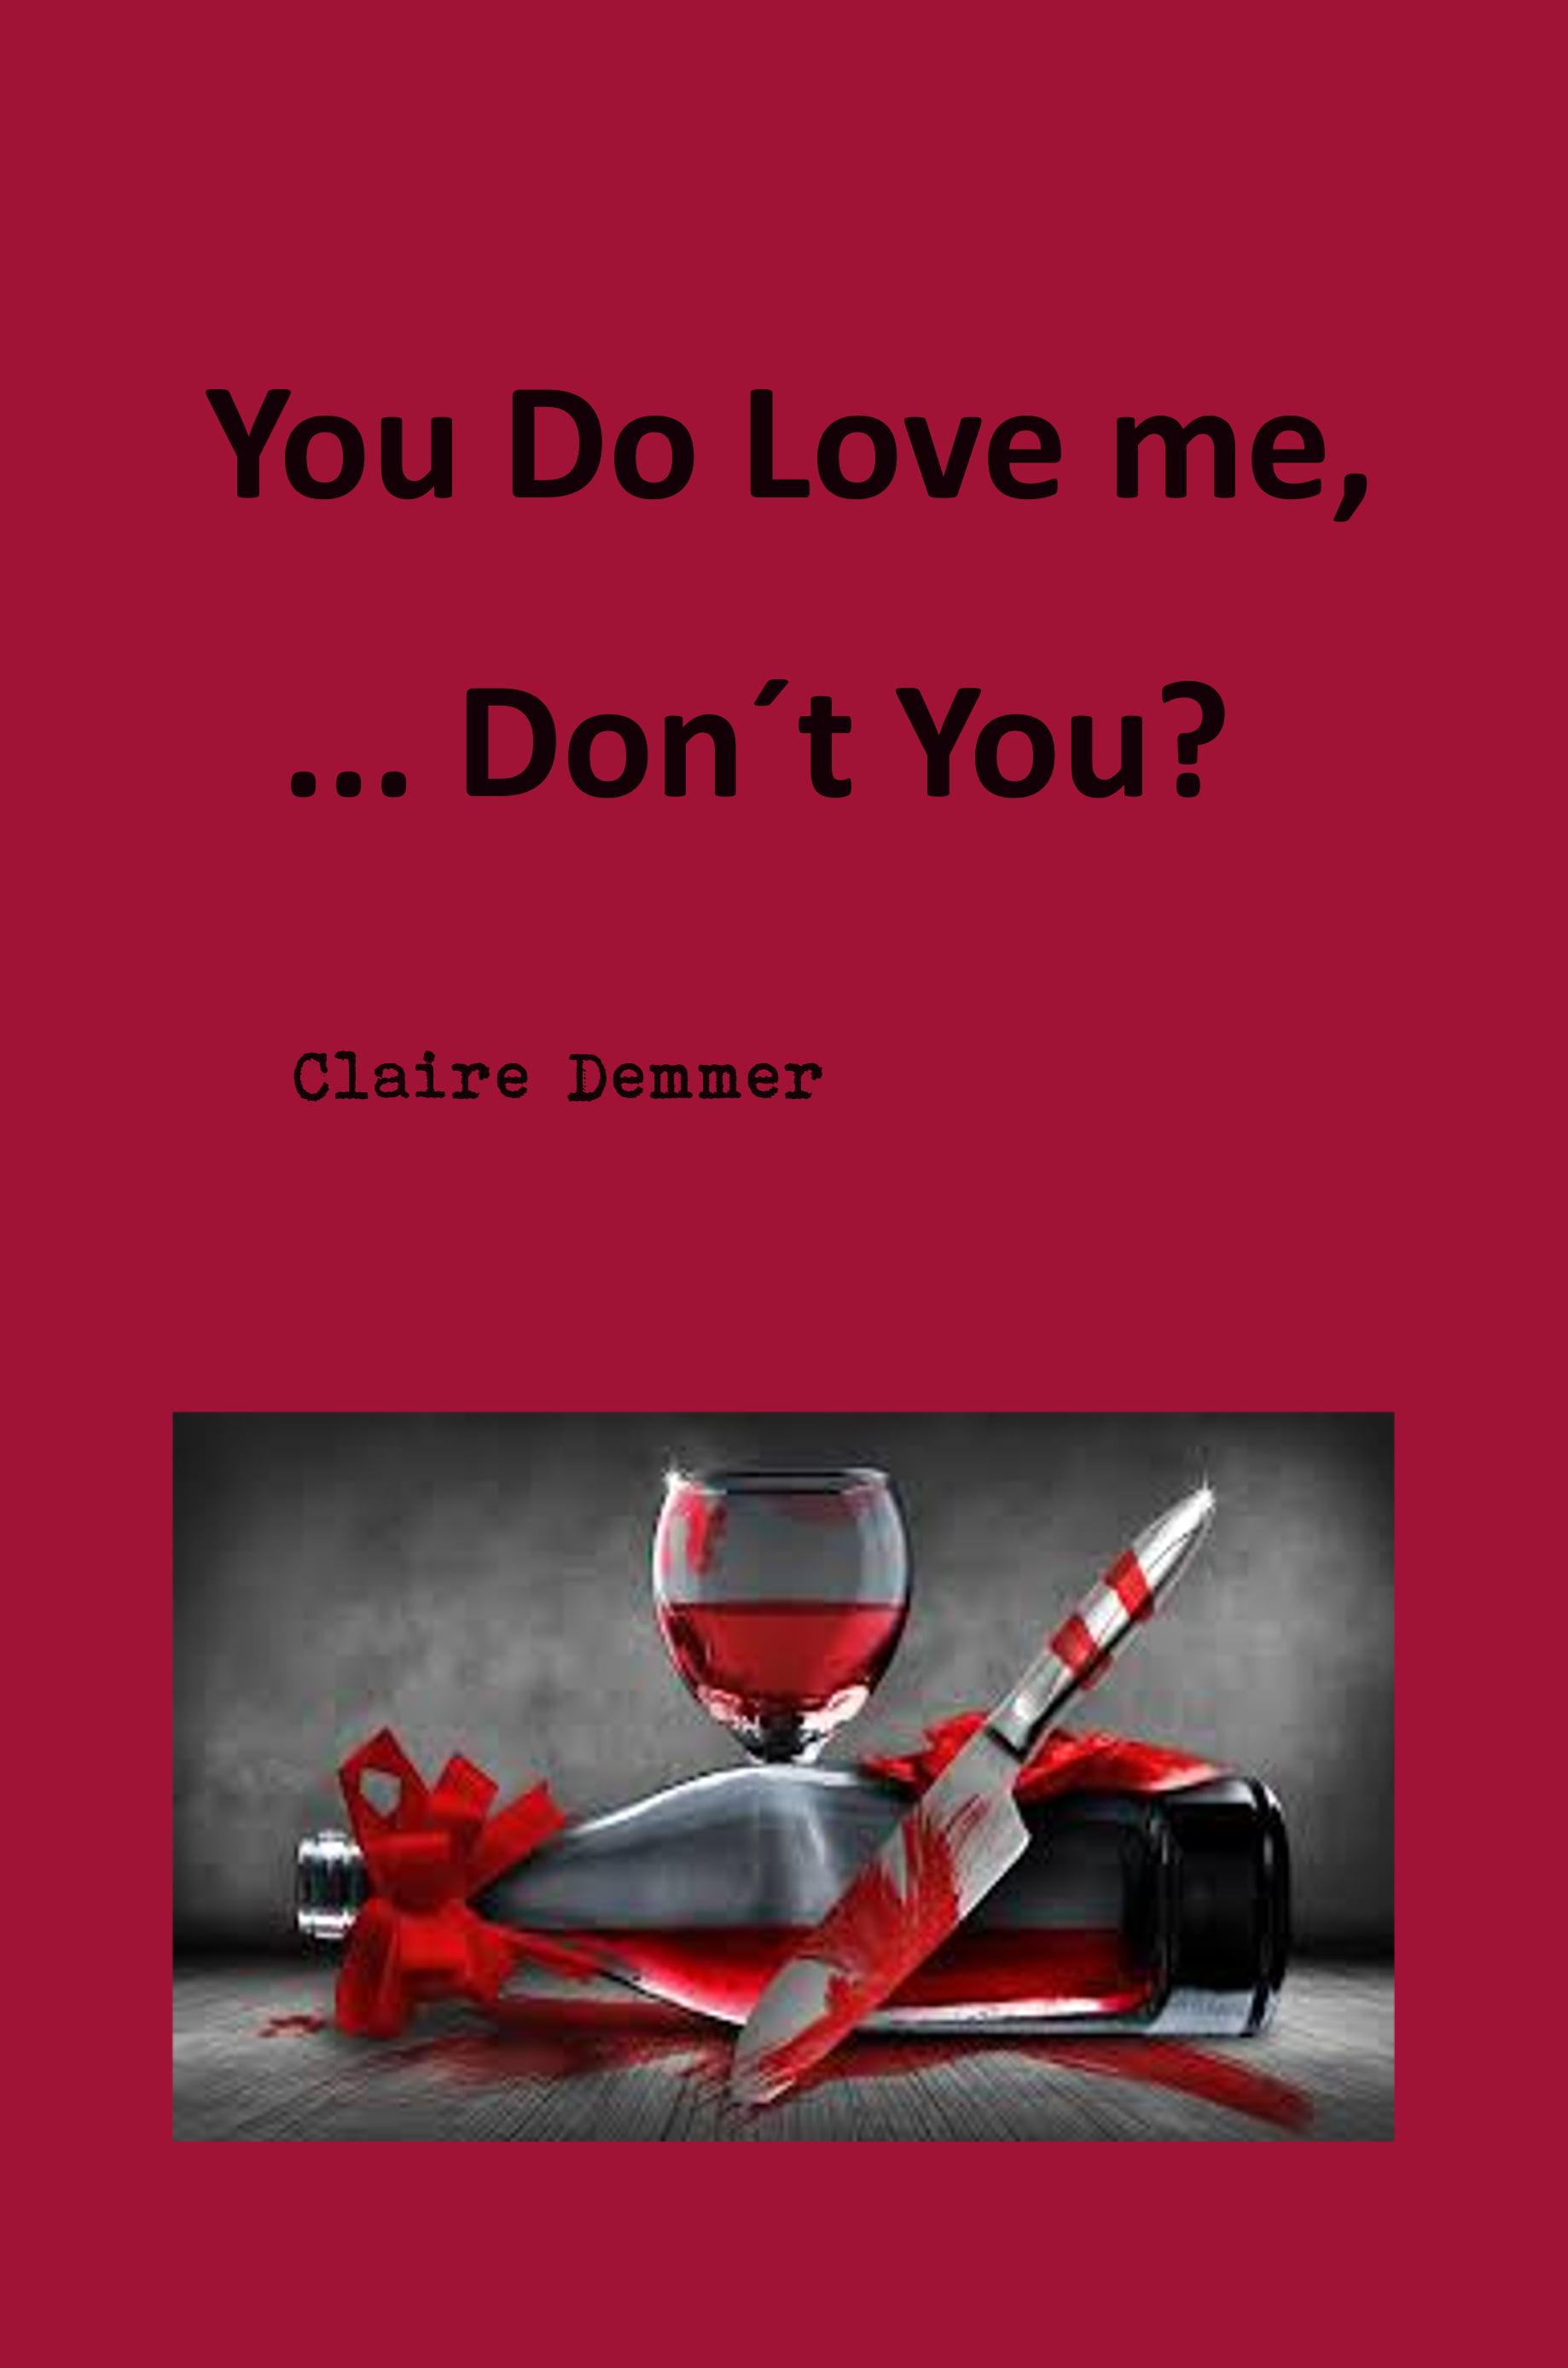 You do love me, don't you? A Funny Scary Psycho Thriller Play